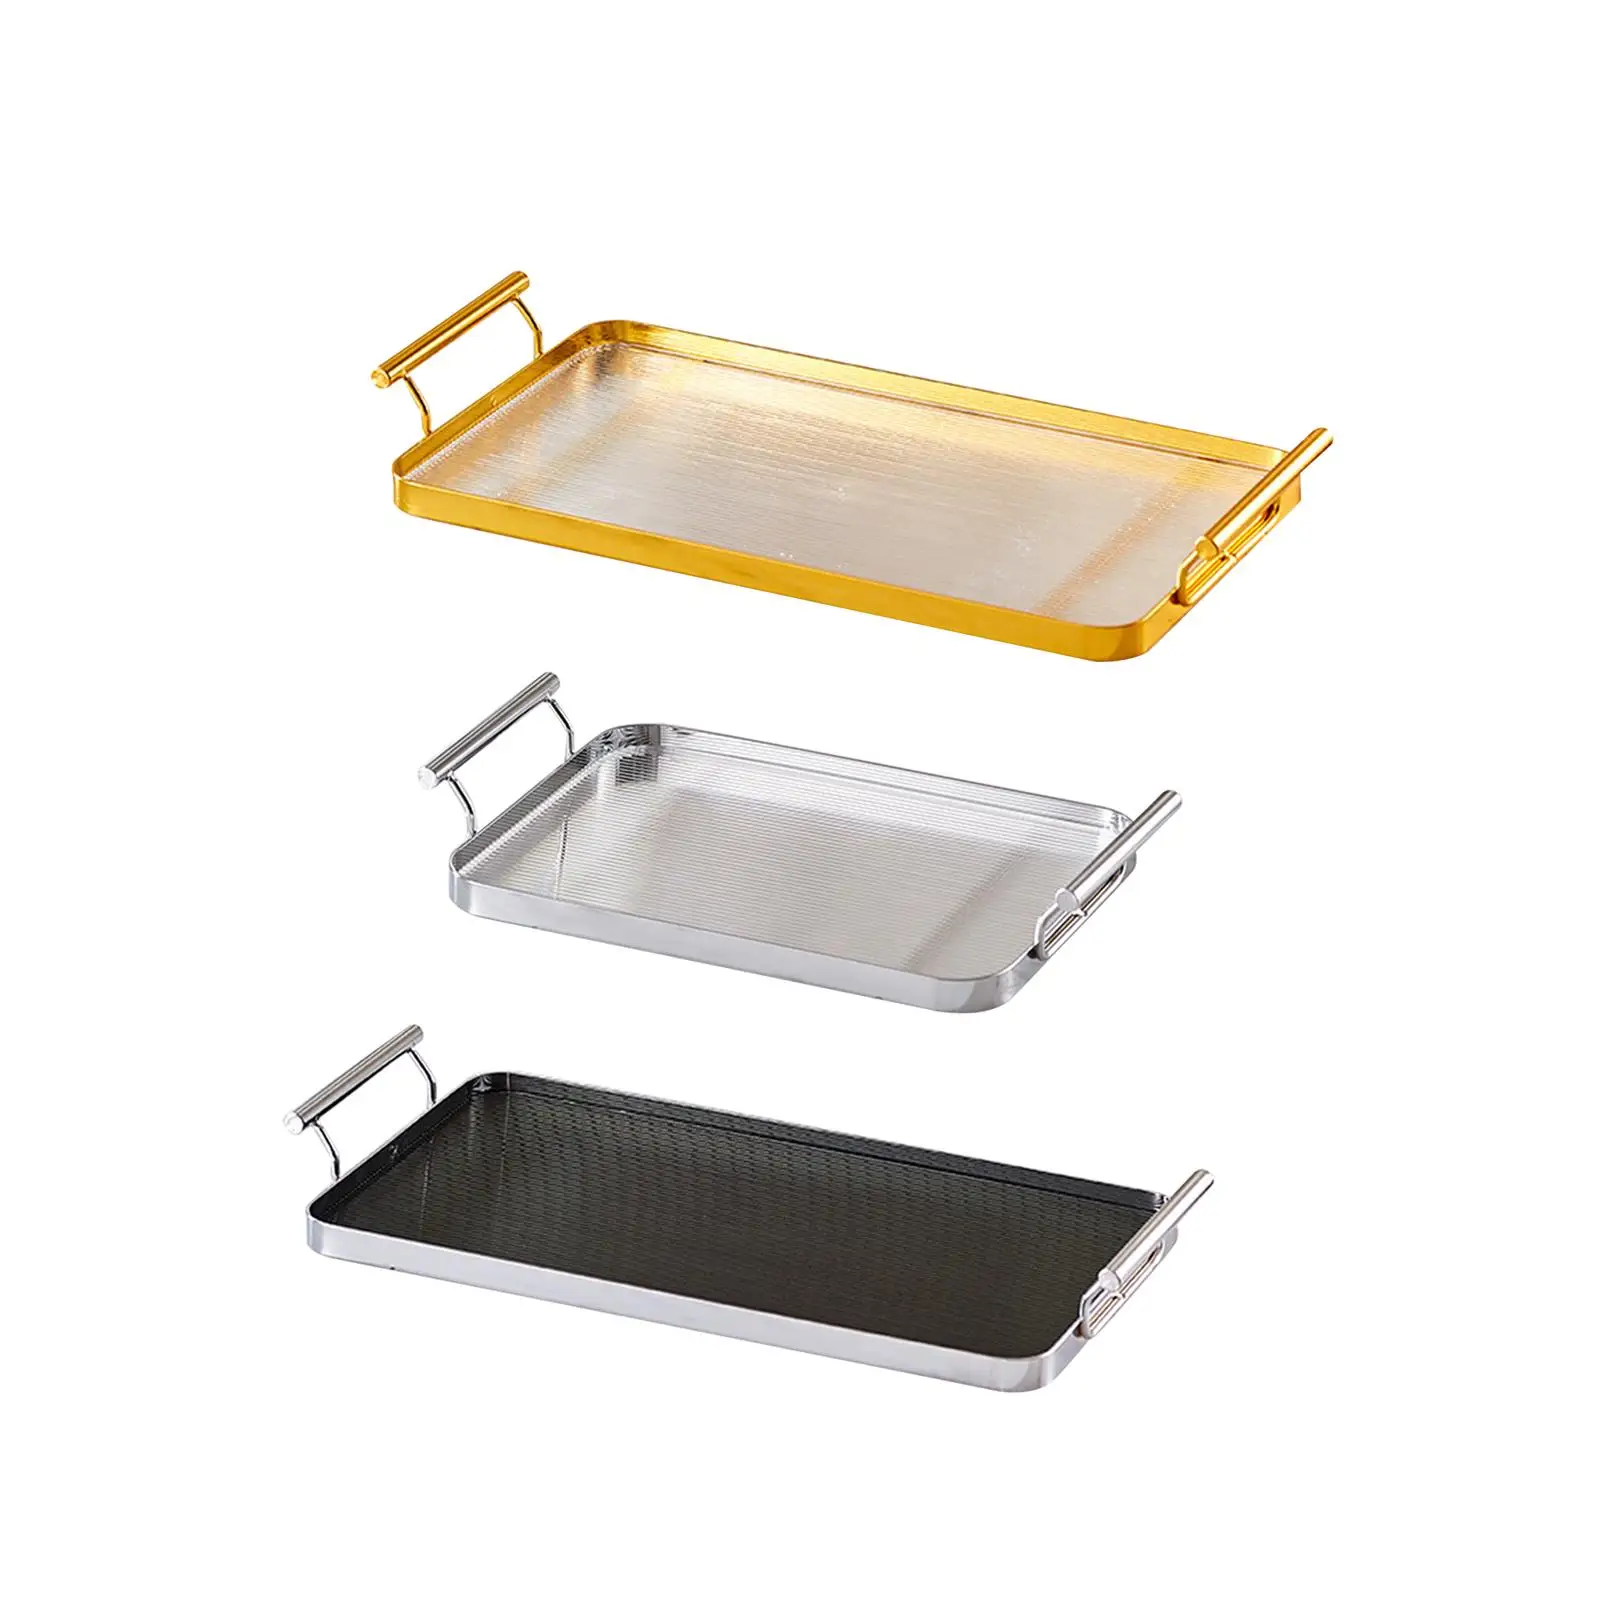 coffee servings Tray Entertaining Bathroom Tray for Kitchen Vanity Cabinet